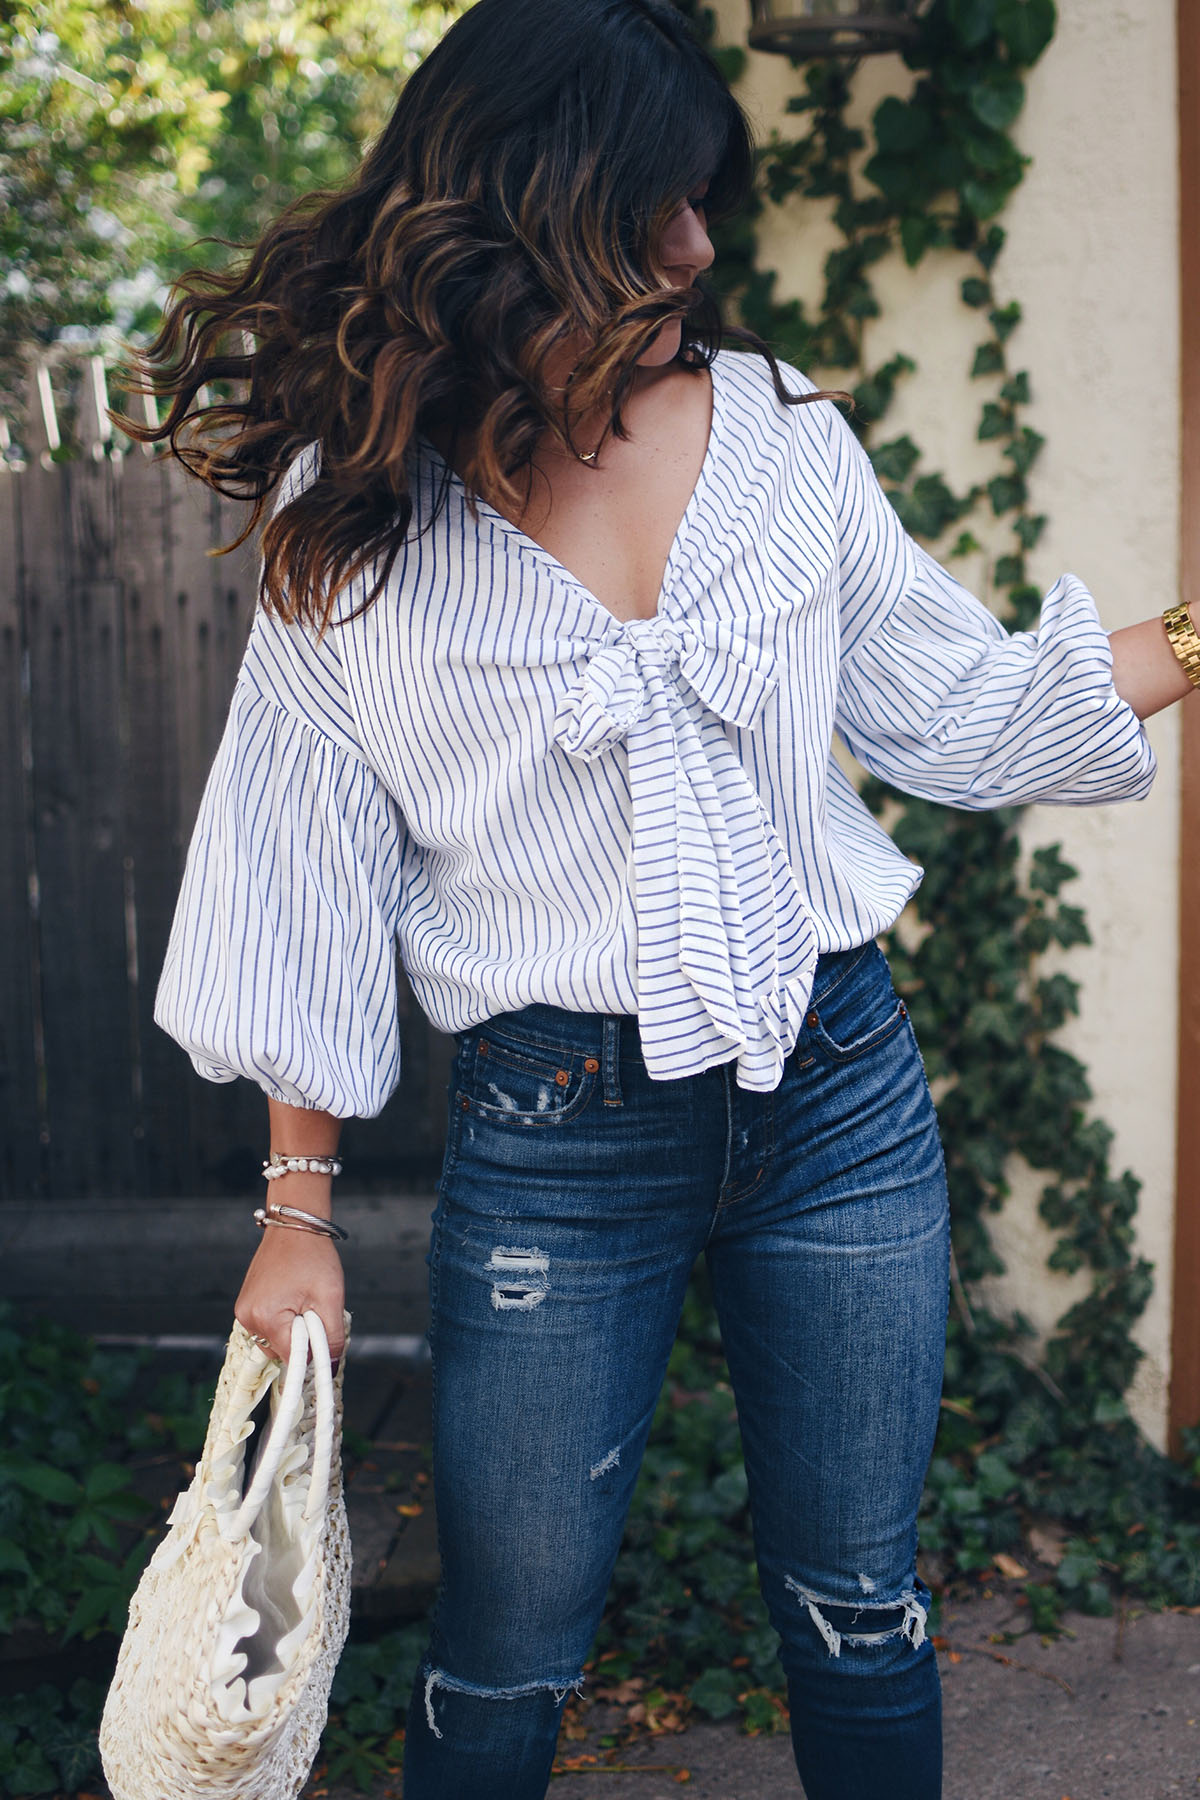 Carolina Hellal of Chic Talk wearing a Shein striped top, Madewell jeans, public Desire sandals and Shein beach bag